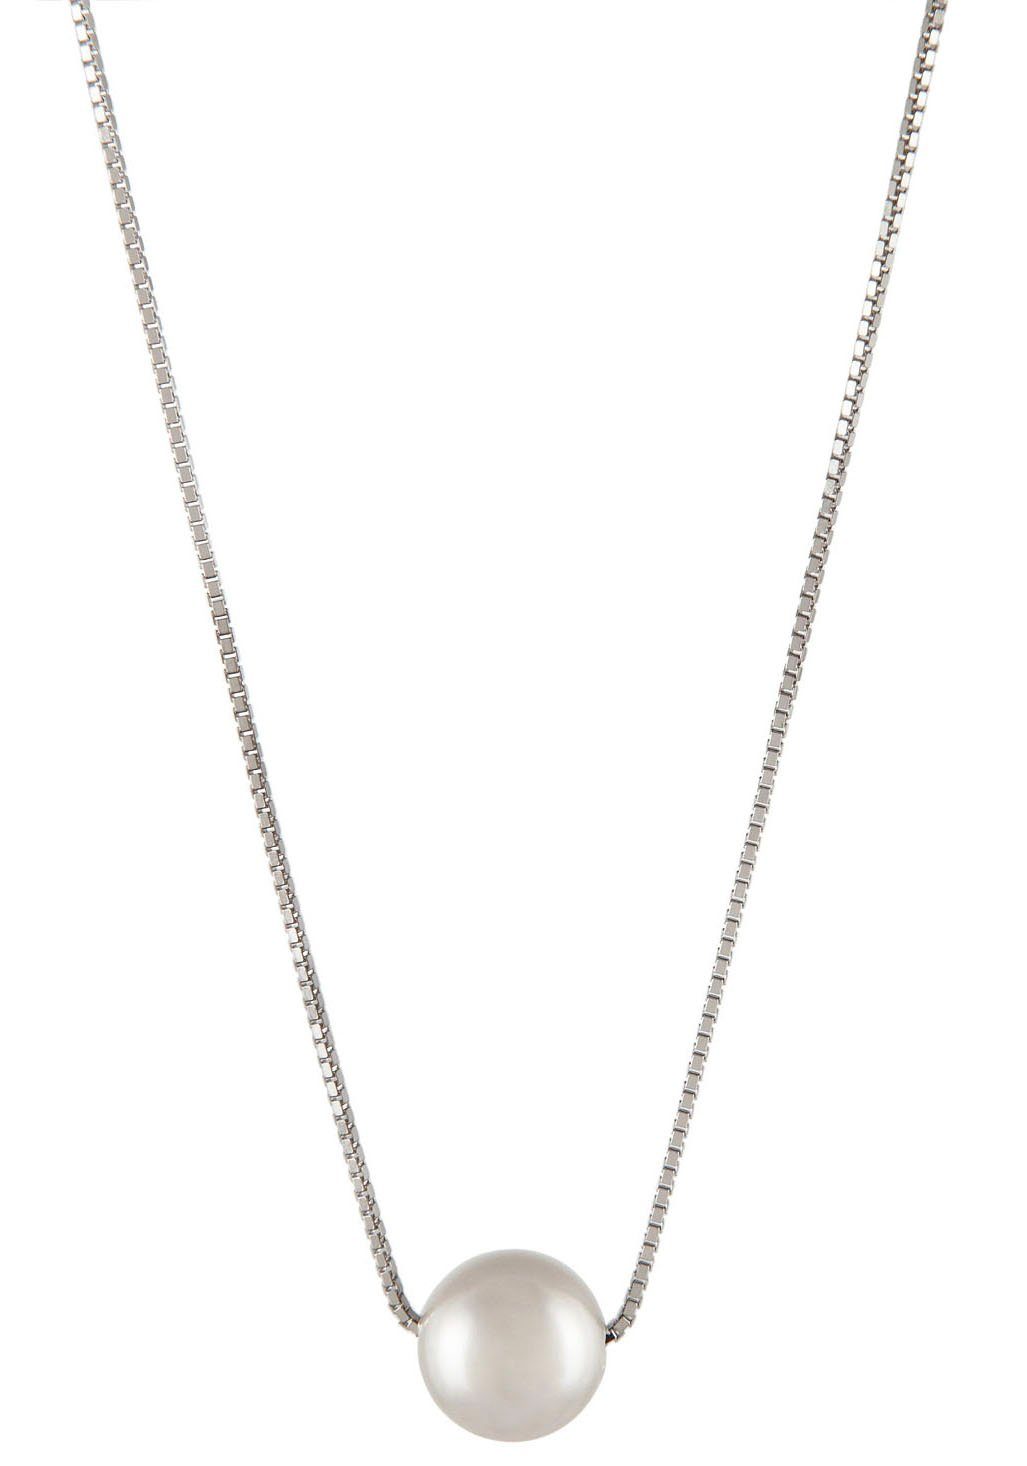 UNIKE JEWELLERY Anhänger Kette mit CLASSY mit UK.CL.1202.0014, (synth) Perle PEARL